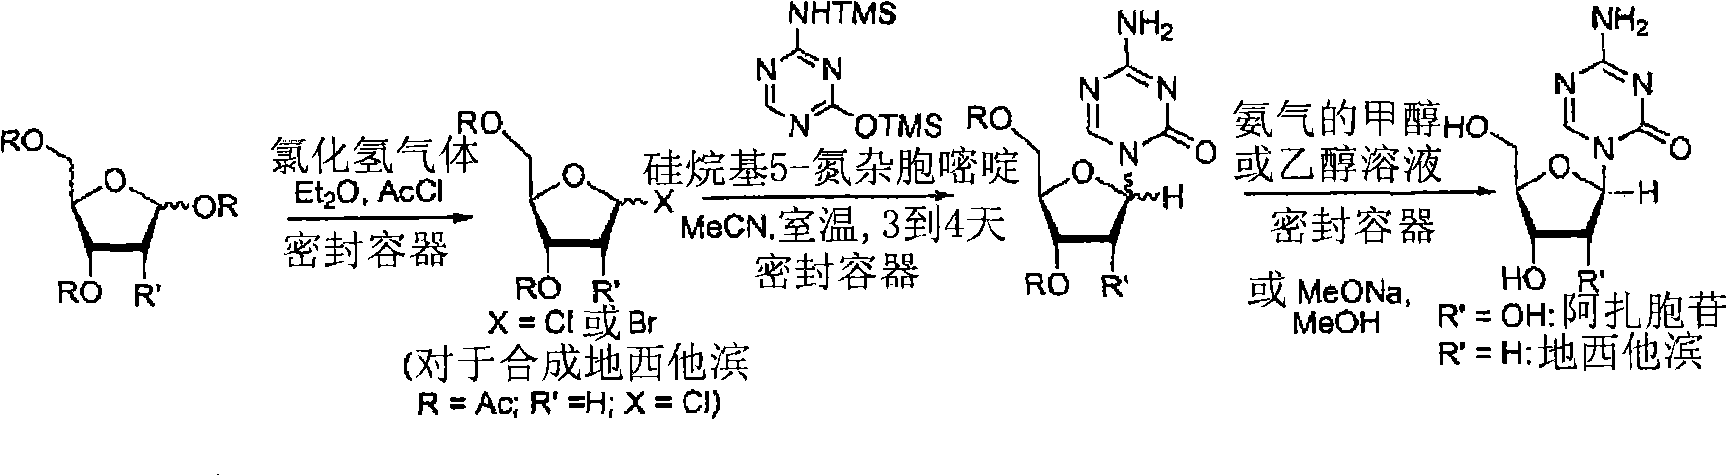 Process for making 5-azacytosine nucleosides and their derivatives